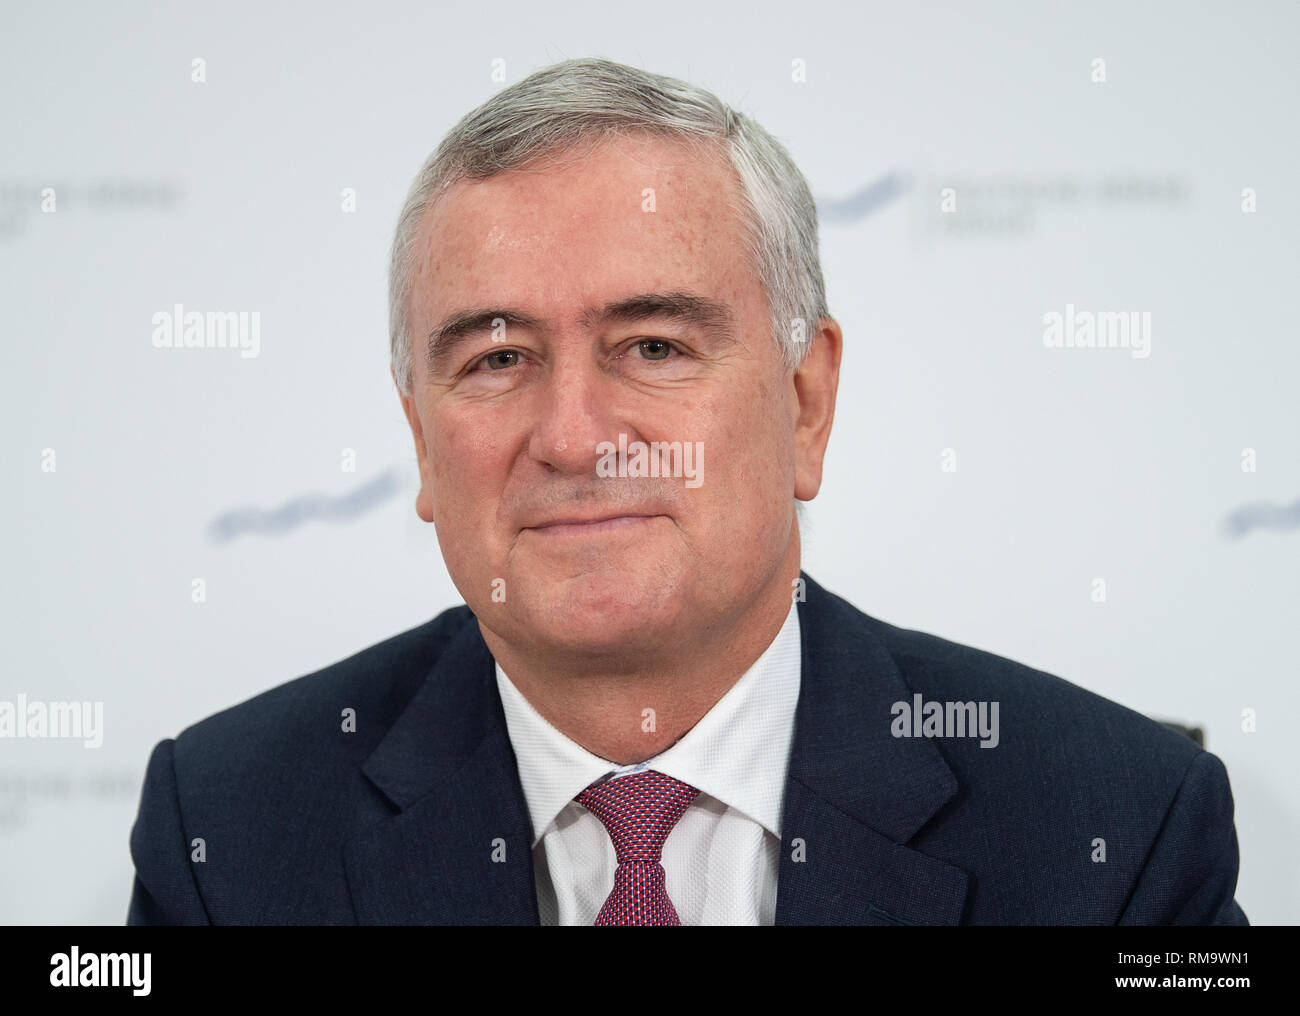 14 February 2019, Hessen, Frankfurt/Main: Gregor Pottmeyer, Chief Financial Officer of Deutsche Börse AG, sits on the podium before the start of the balance sheet post. The company published its figures for the year 2018 the evening before. Photo: Silas Stein/dpa Stock Photo